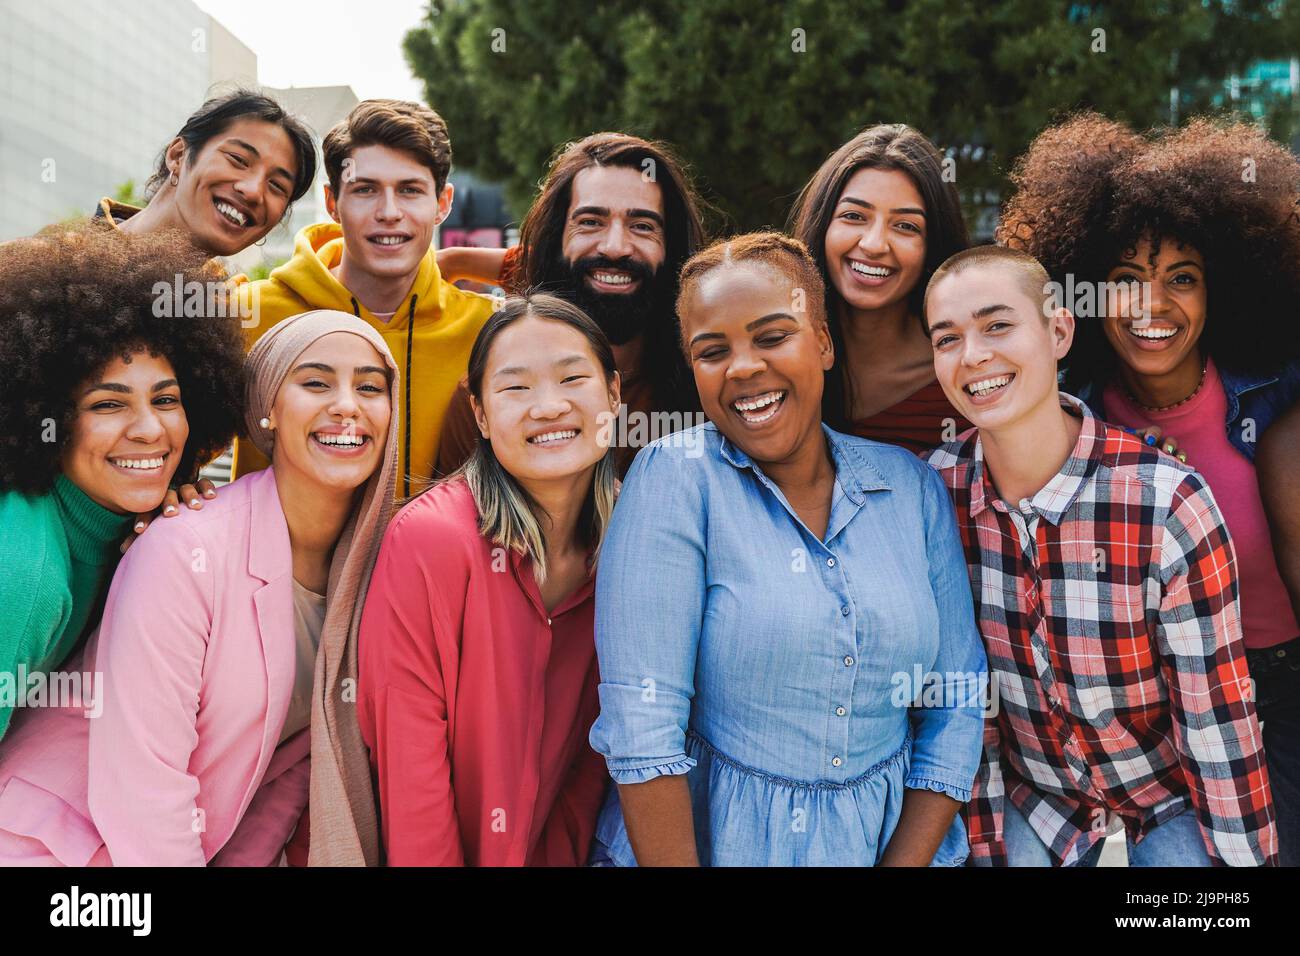 Multiethnic diverse group of people having fun outdoor - Diversity lifestyle concept Stock Photo